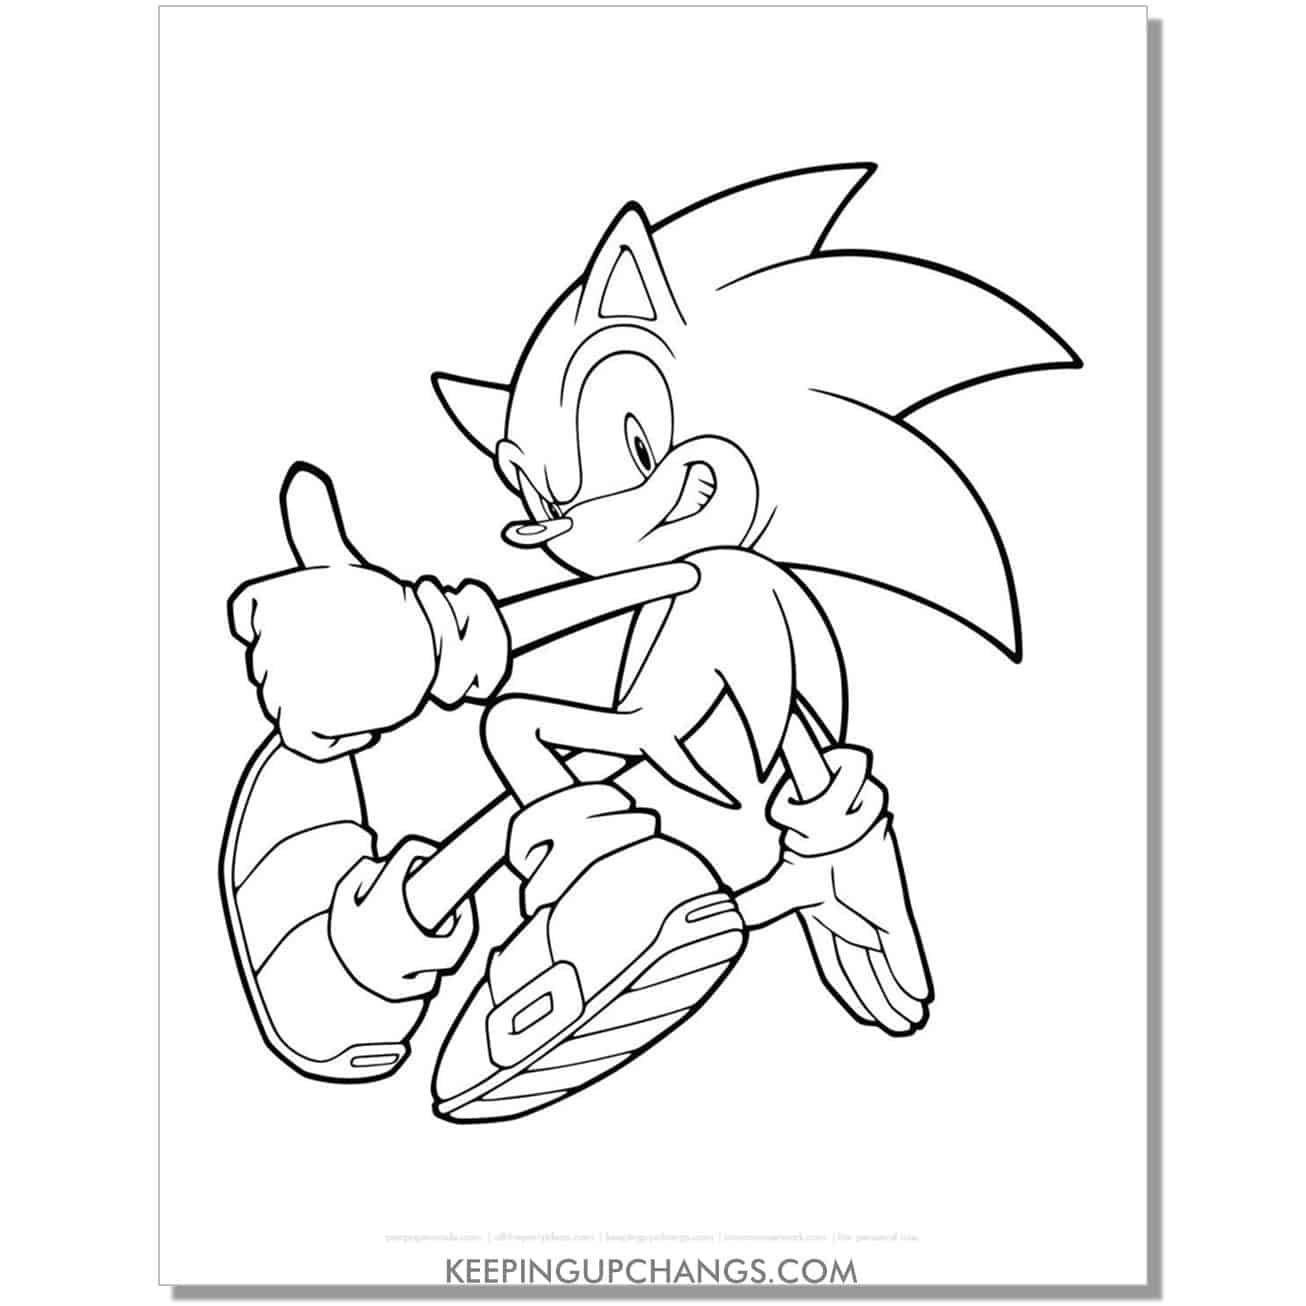 sonic walking with thumbs up coloring page.